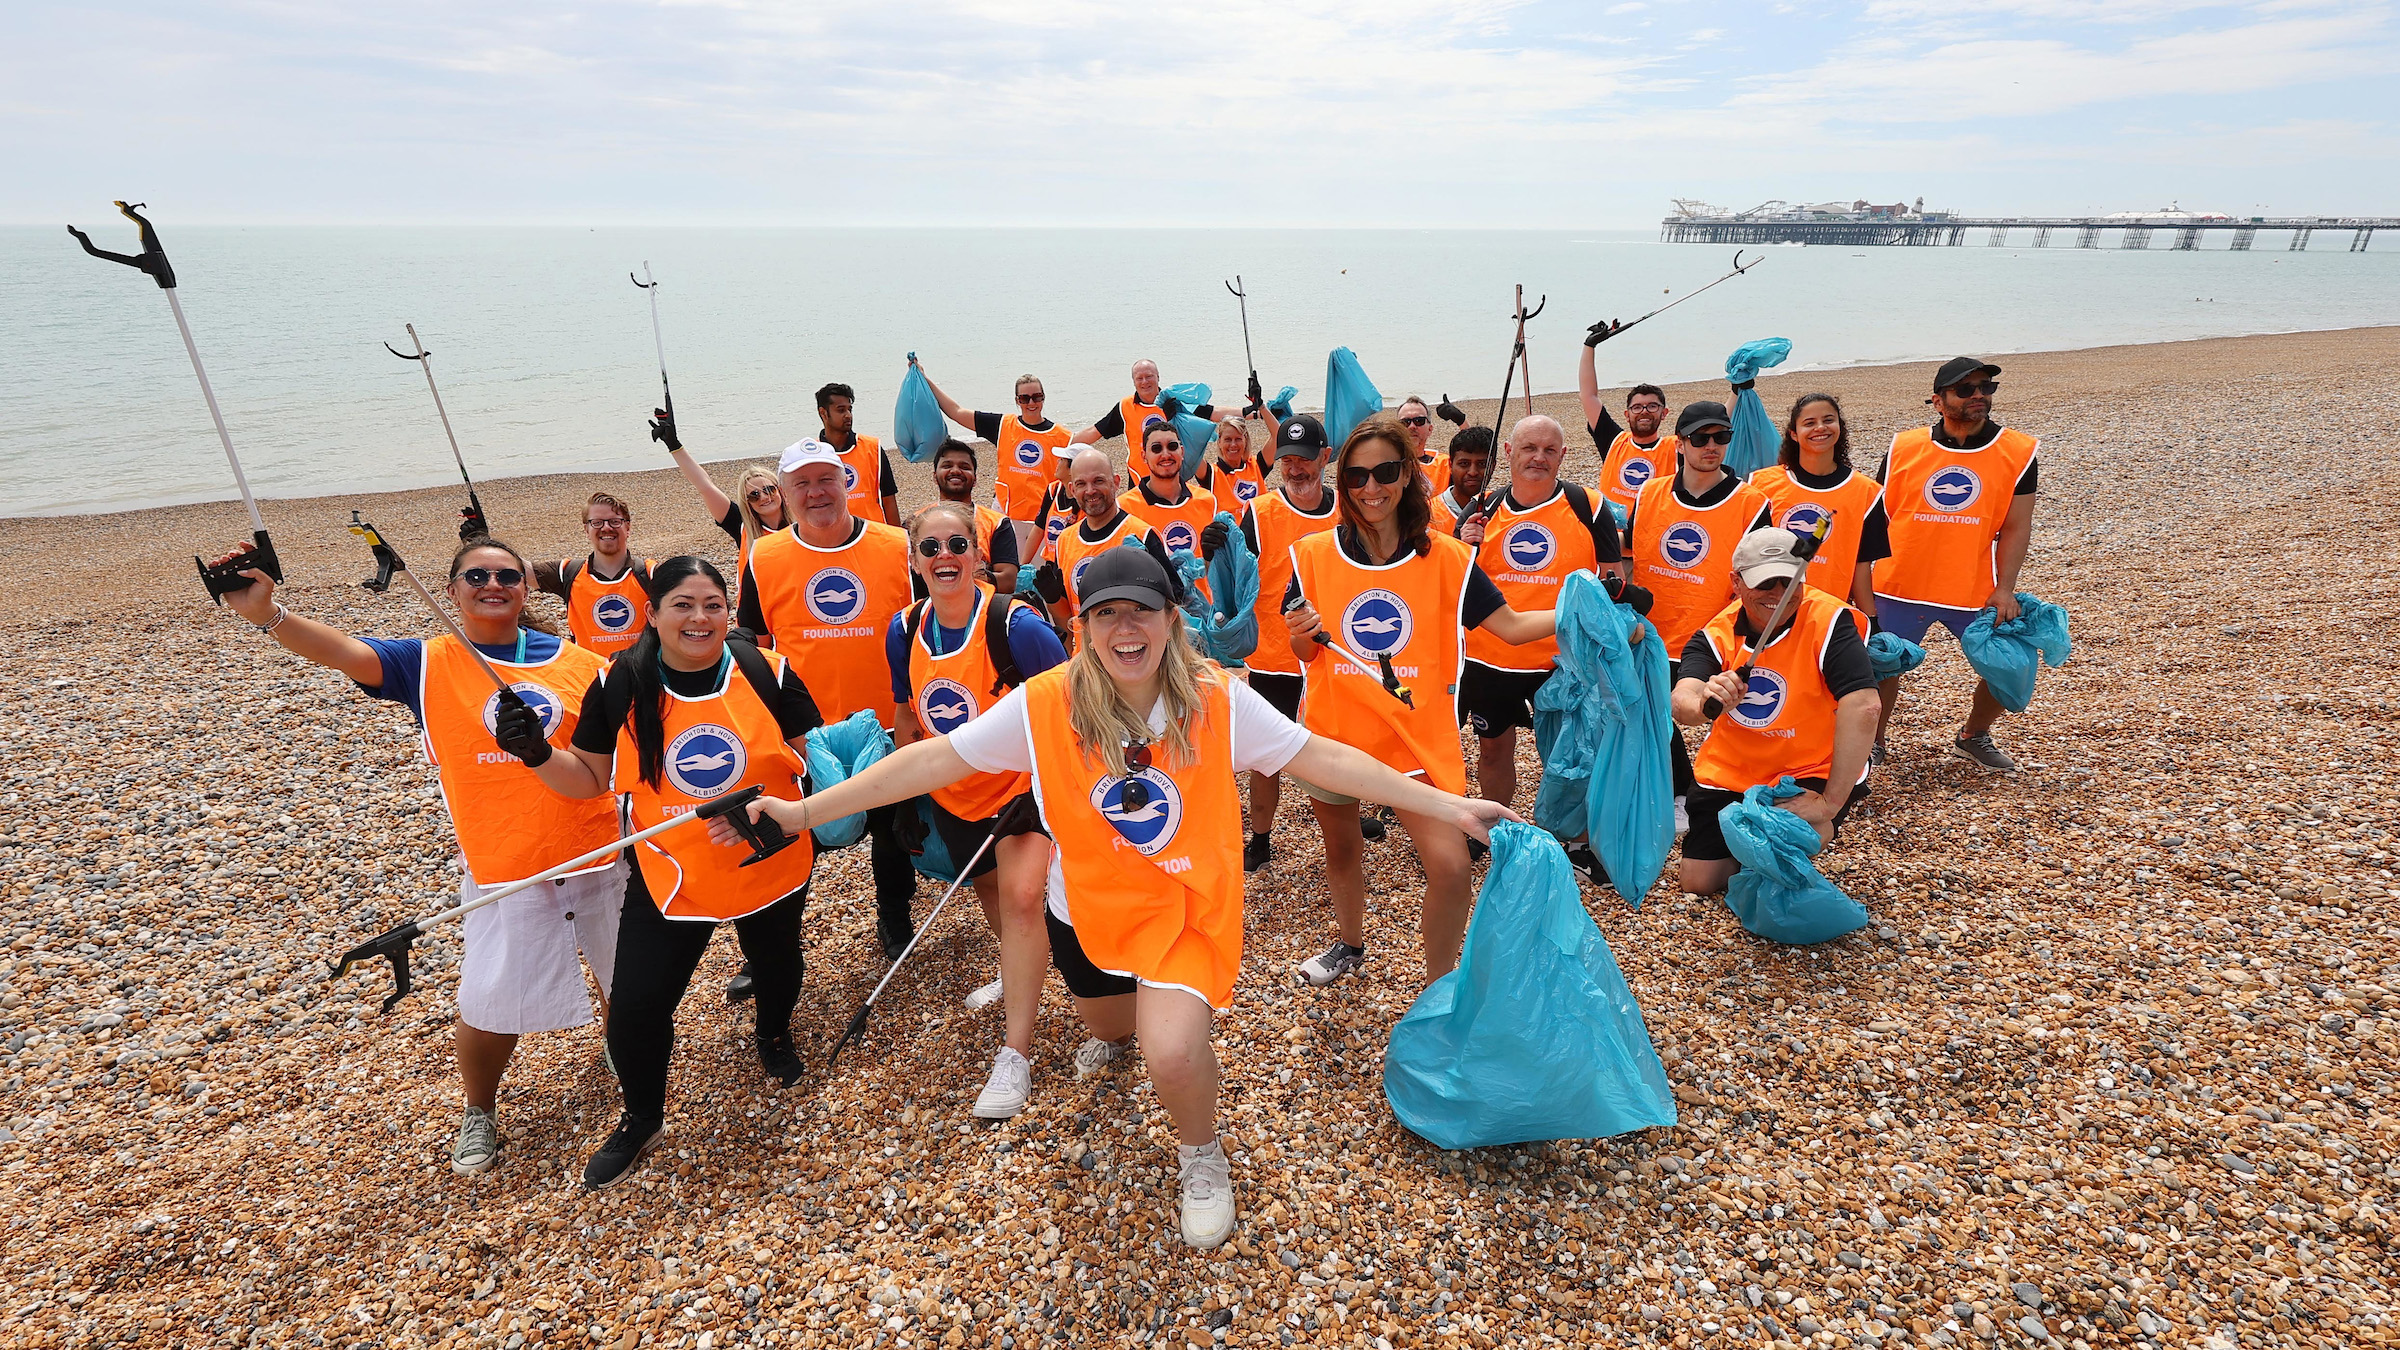 Albion and British Airways clear plastic from Brighton beach